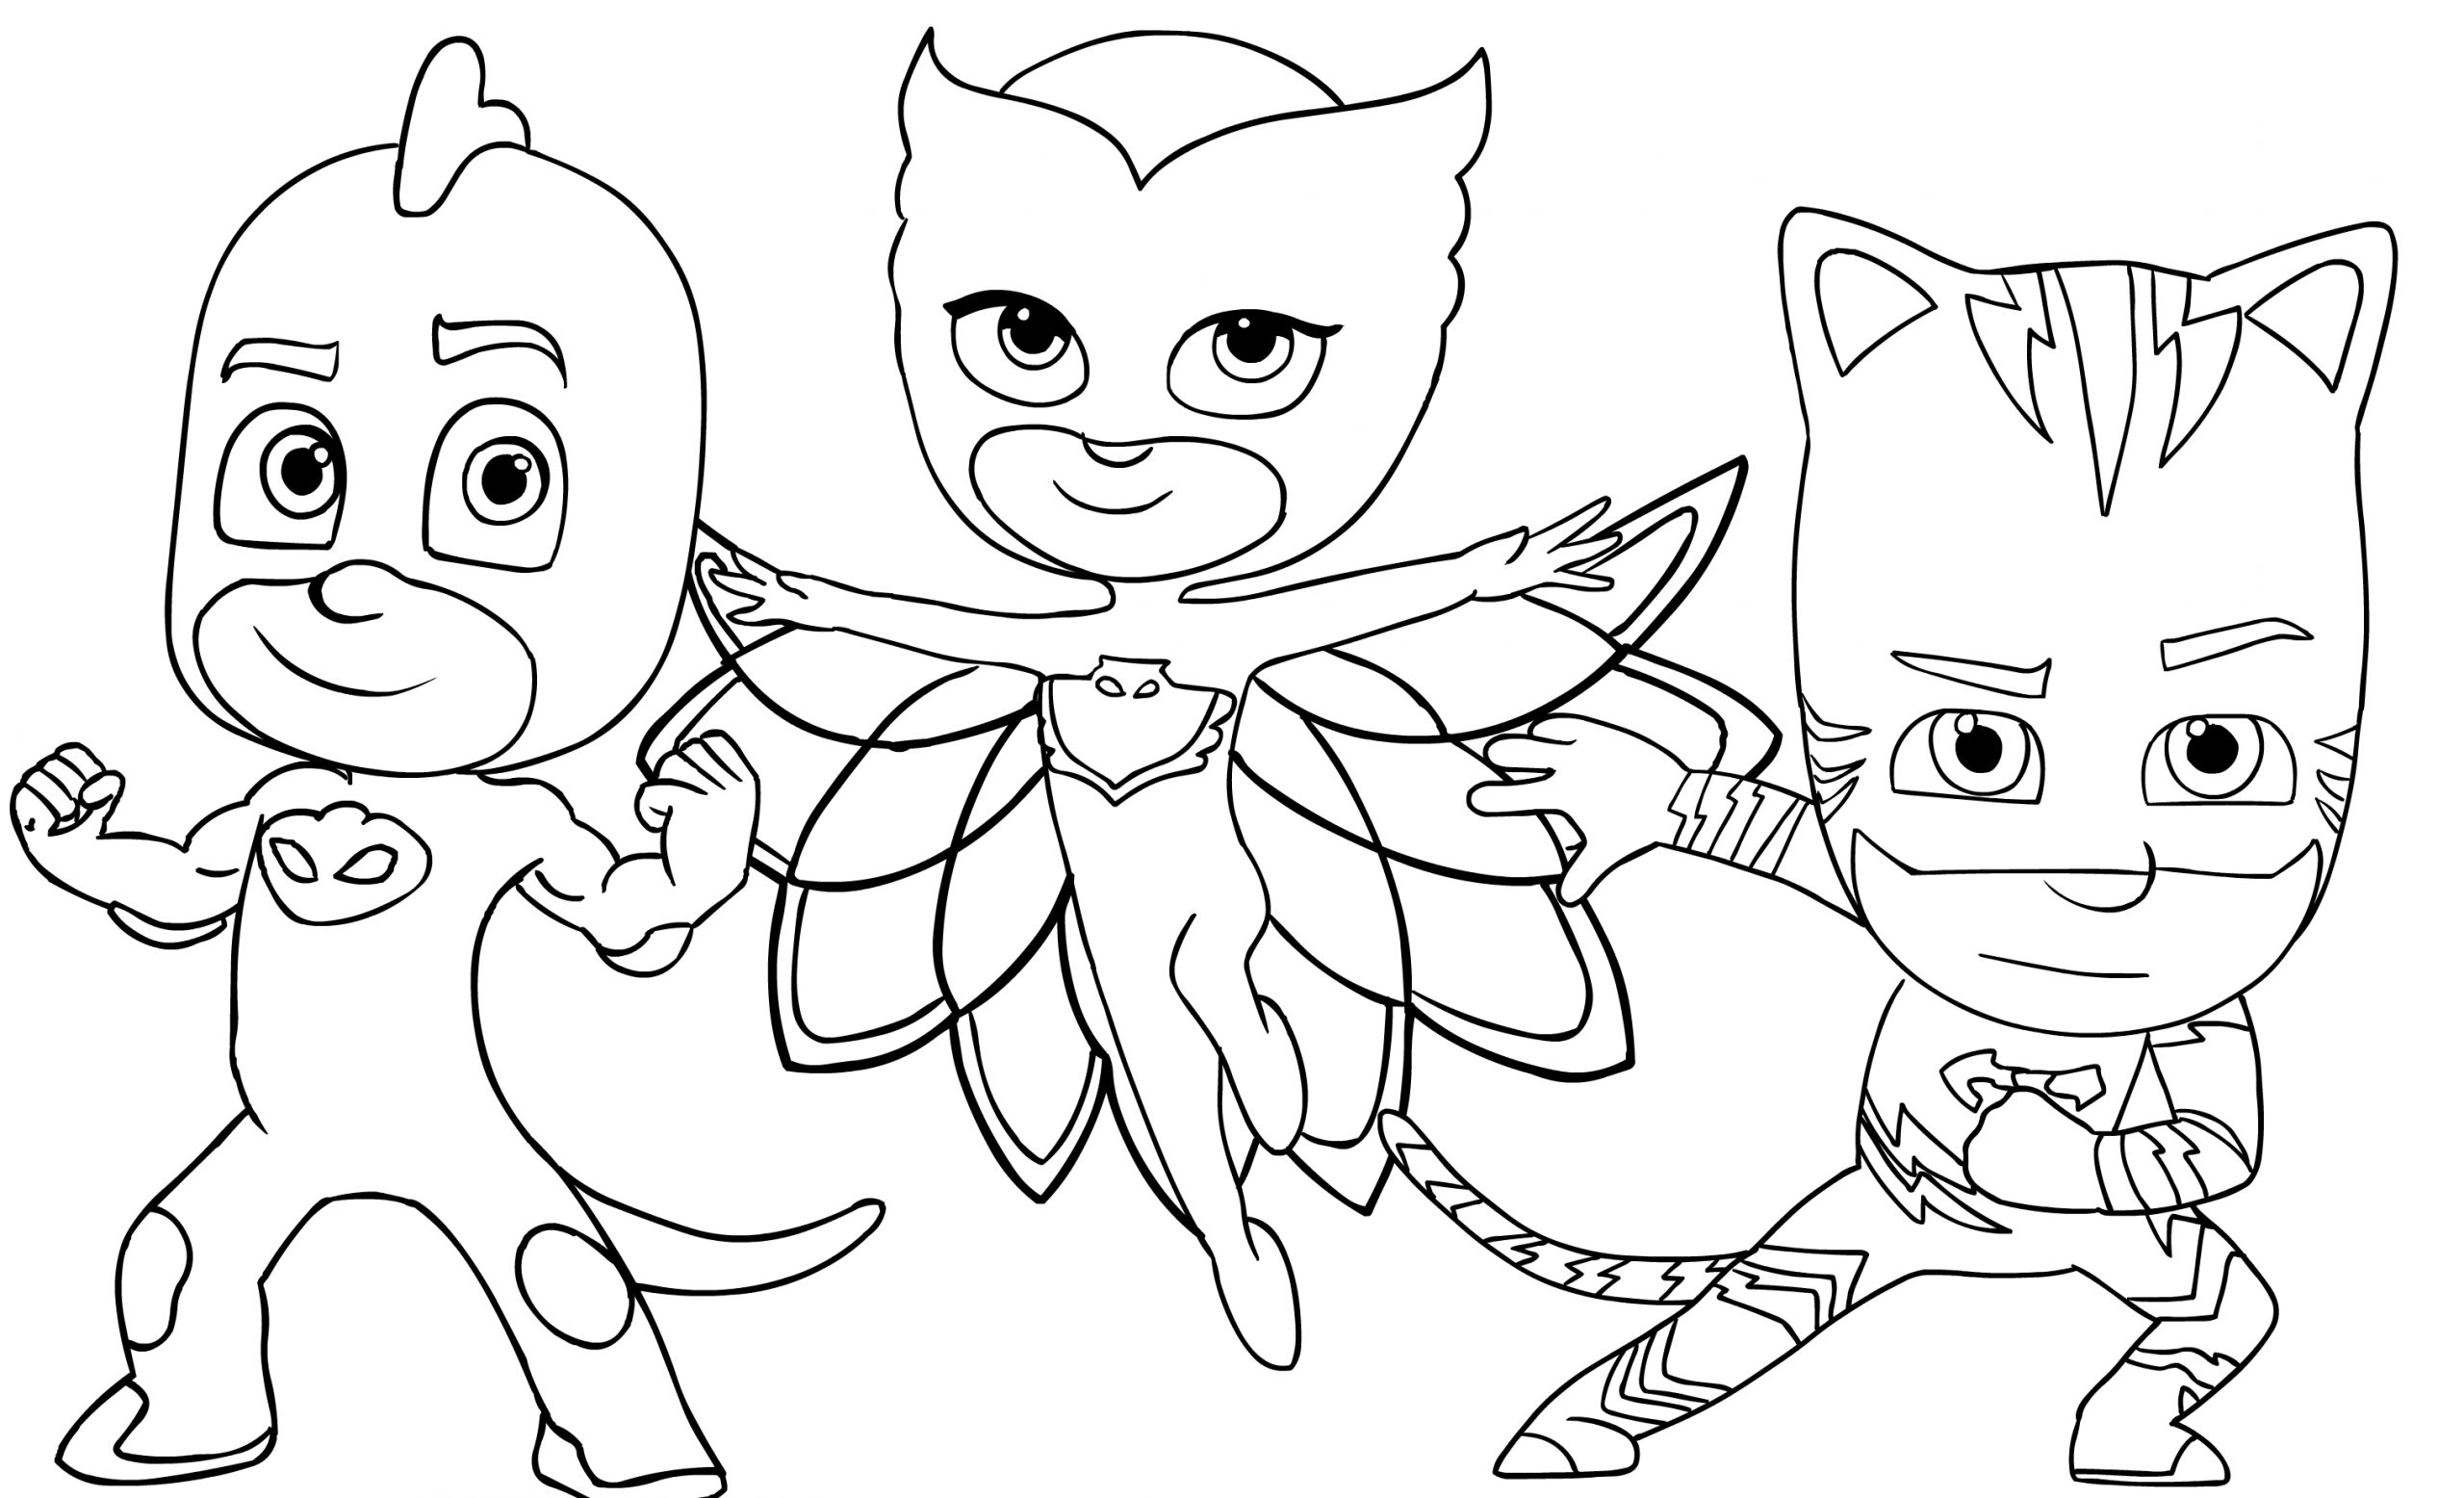 coloring-book-free-coloring-page-for-kids-printable-pj-masks-to-print